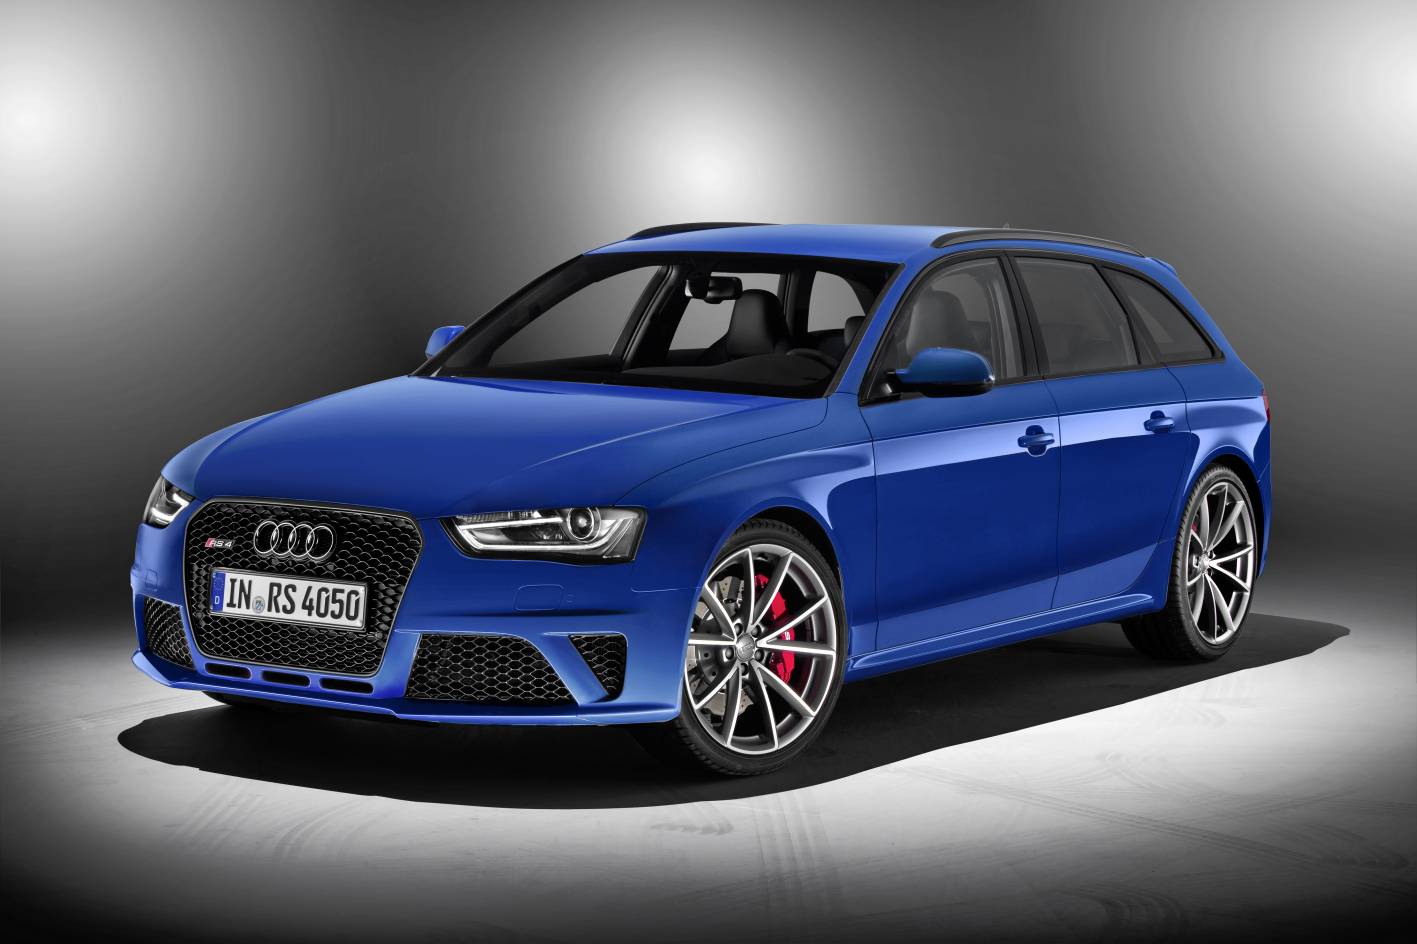 Audi RS 4 Avant ‘Nogaro’ edition on sale from $171,300